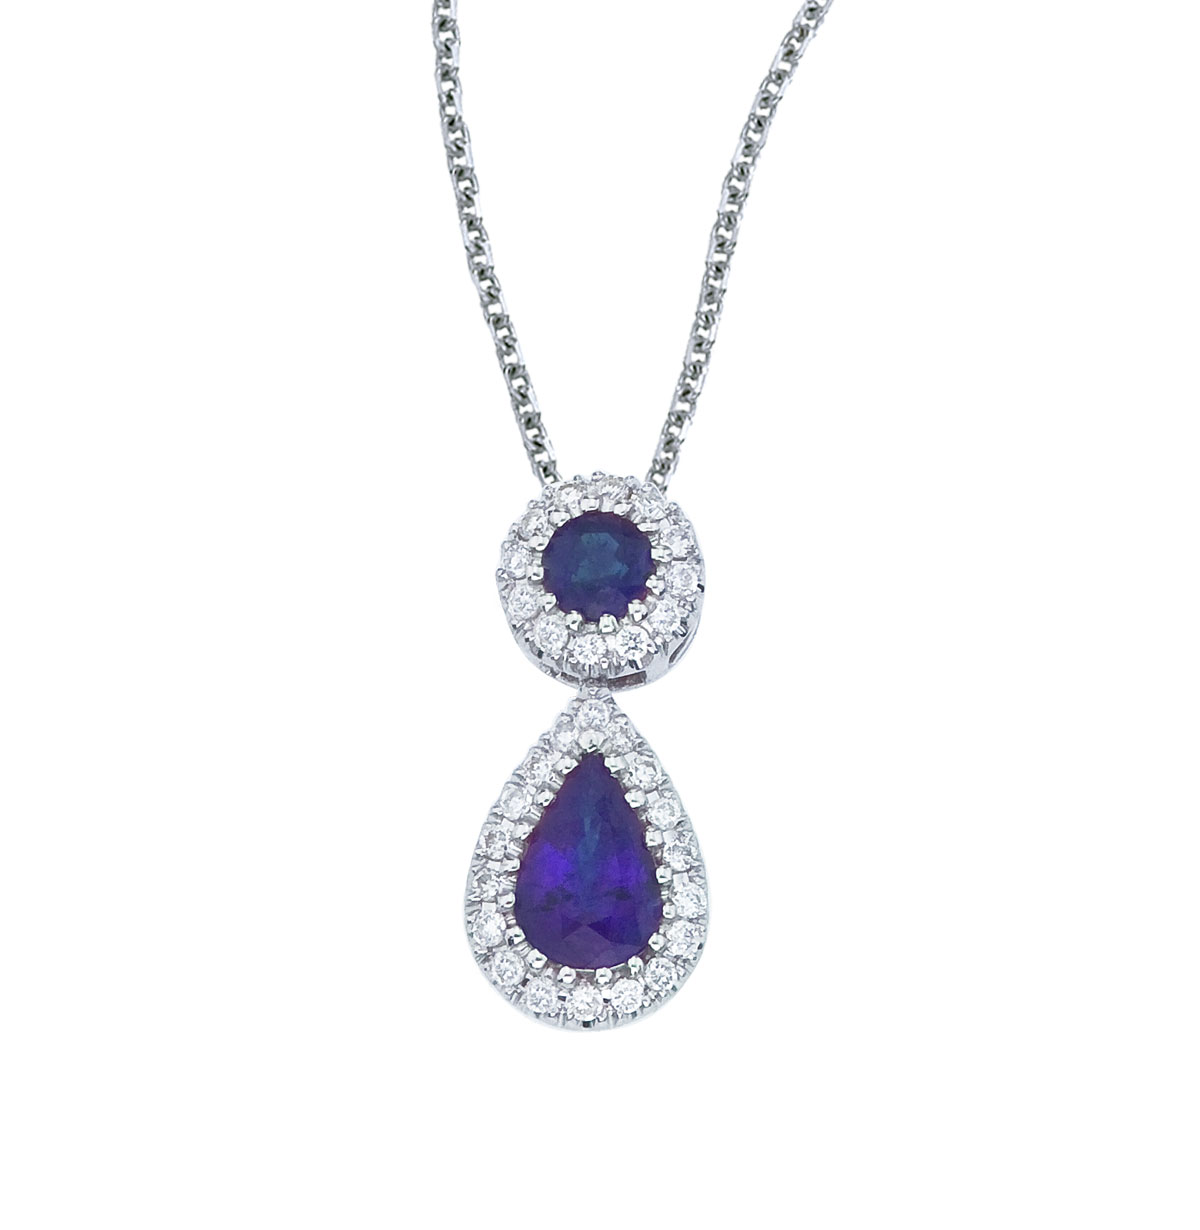 This beautiful 14k white gold pendant features a 6x4 mm sapphire dangling from a 2.5 mm round sap...